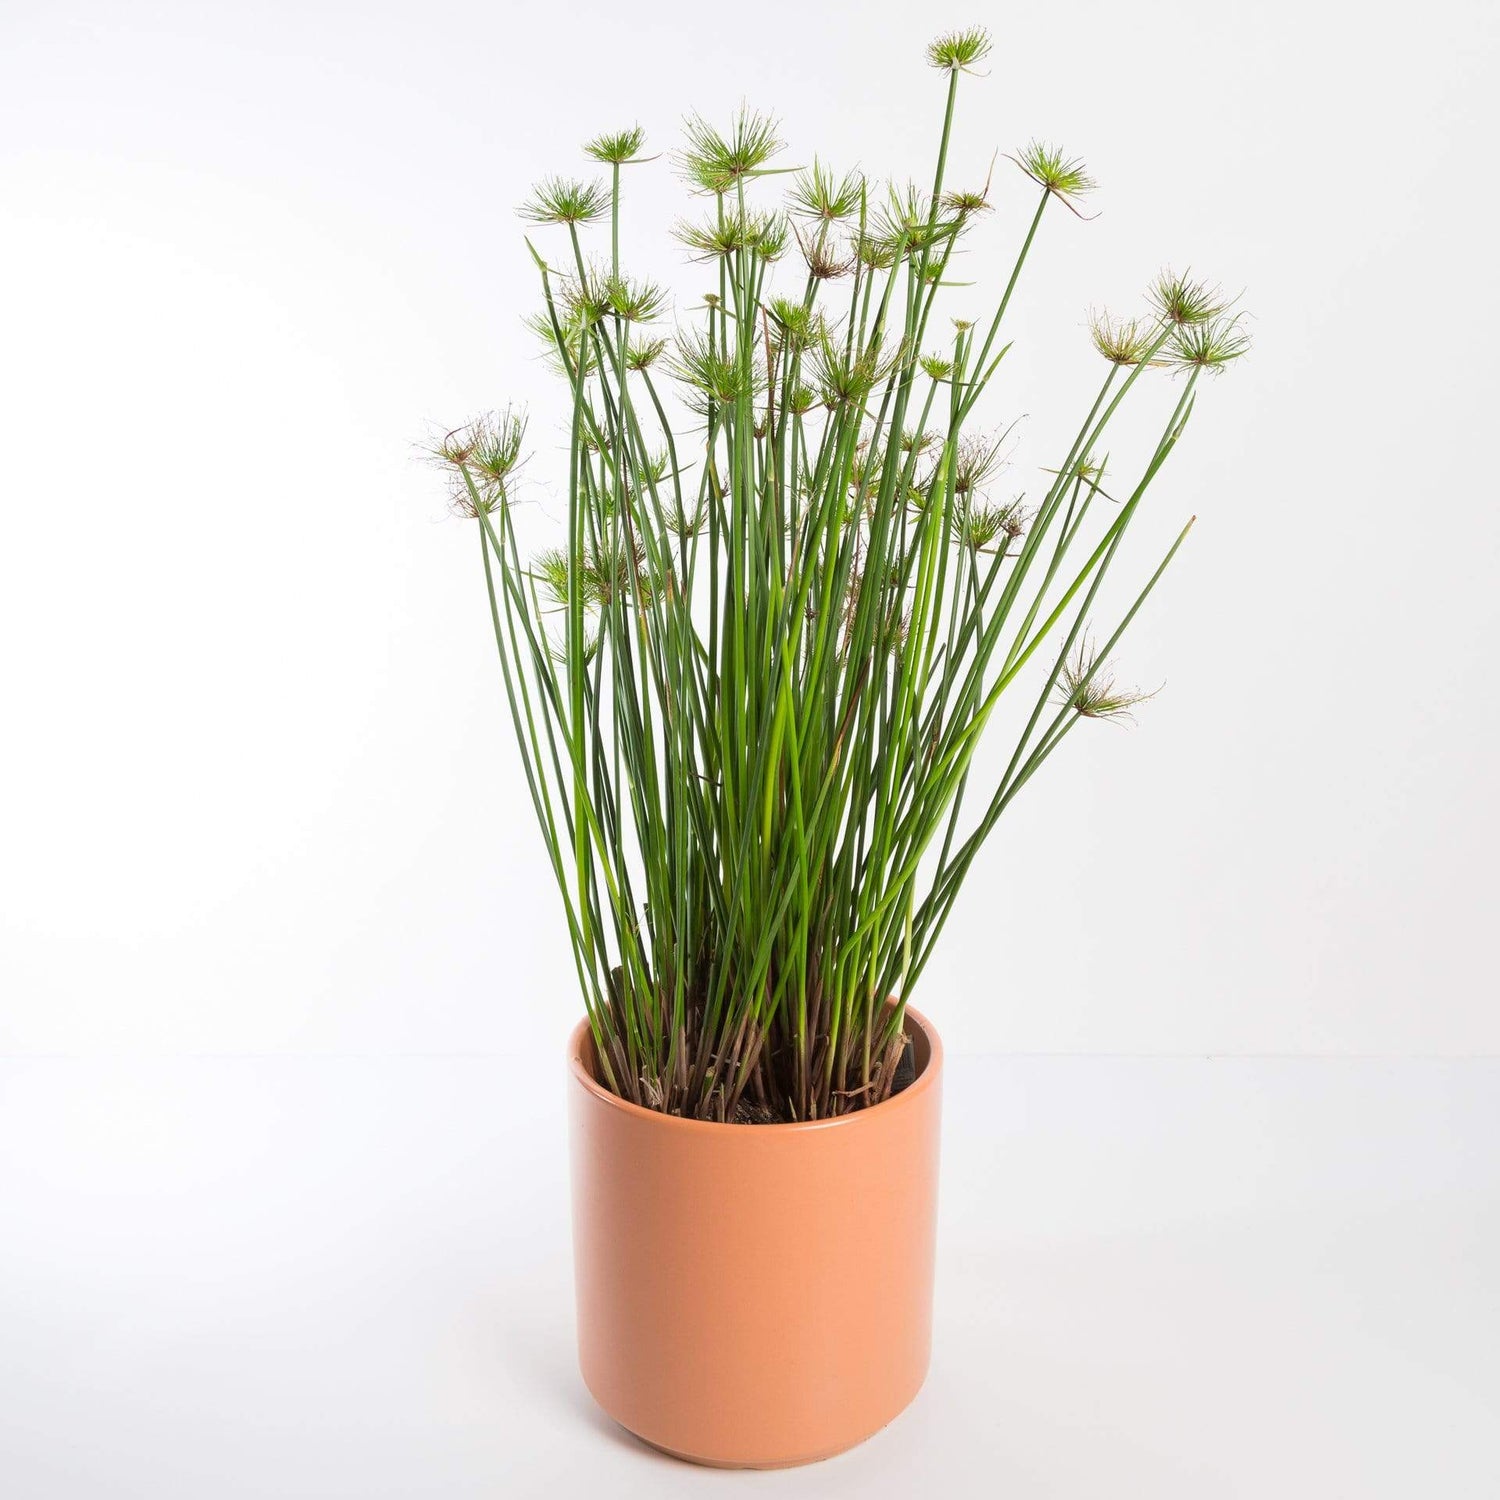 Urban Sprouts Plant 6" in nursery pot Papyrus 'Dwarf'